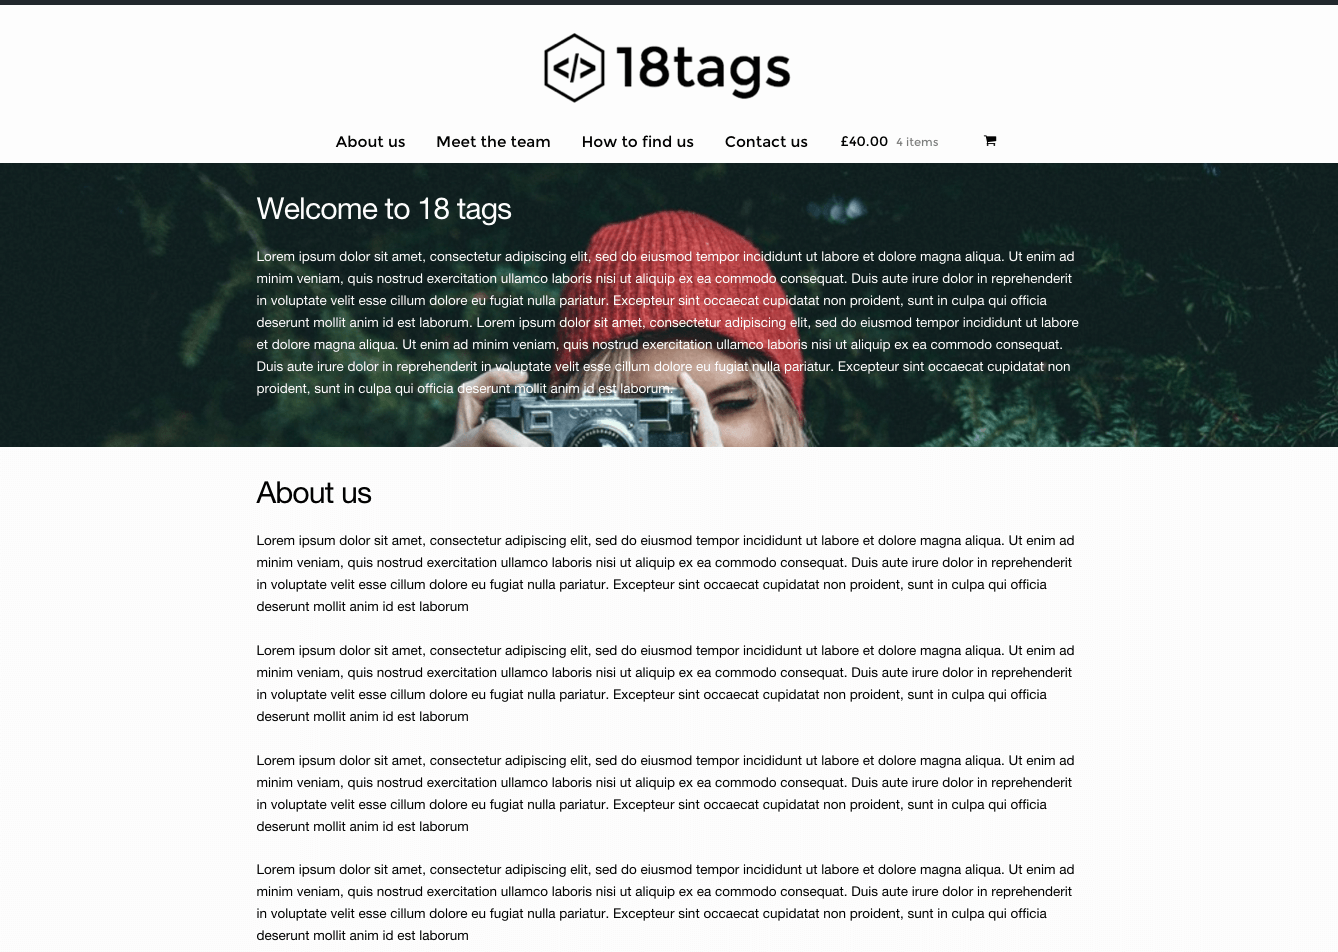 Introducing 18 tags – our new free WordPress theme